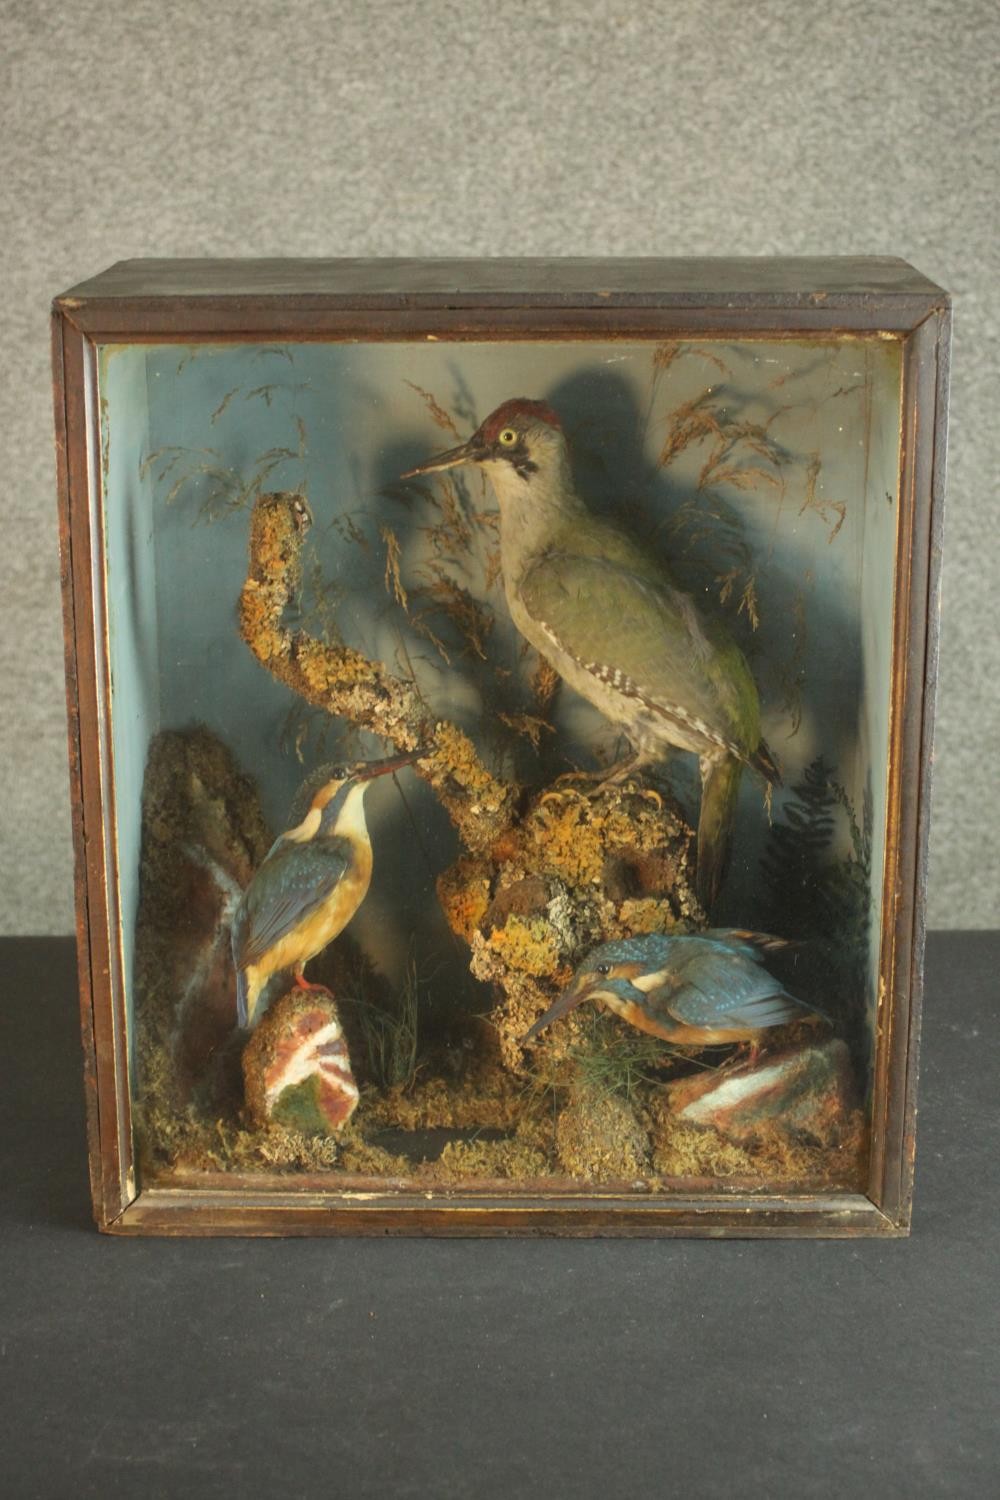 A Victorian or Edwardian taxidermy diorama with two kingfishers and a green woodpecker in a